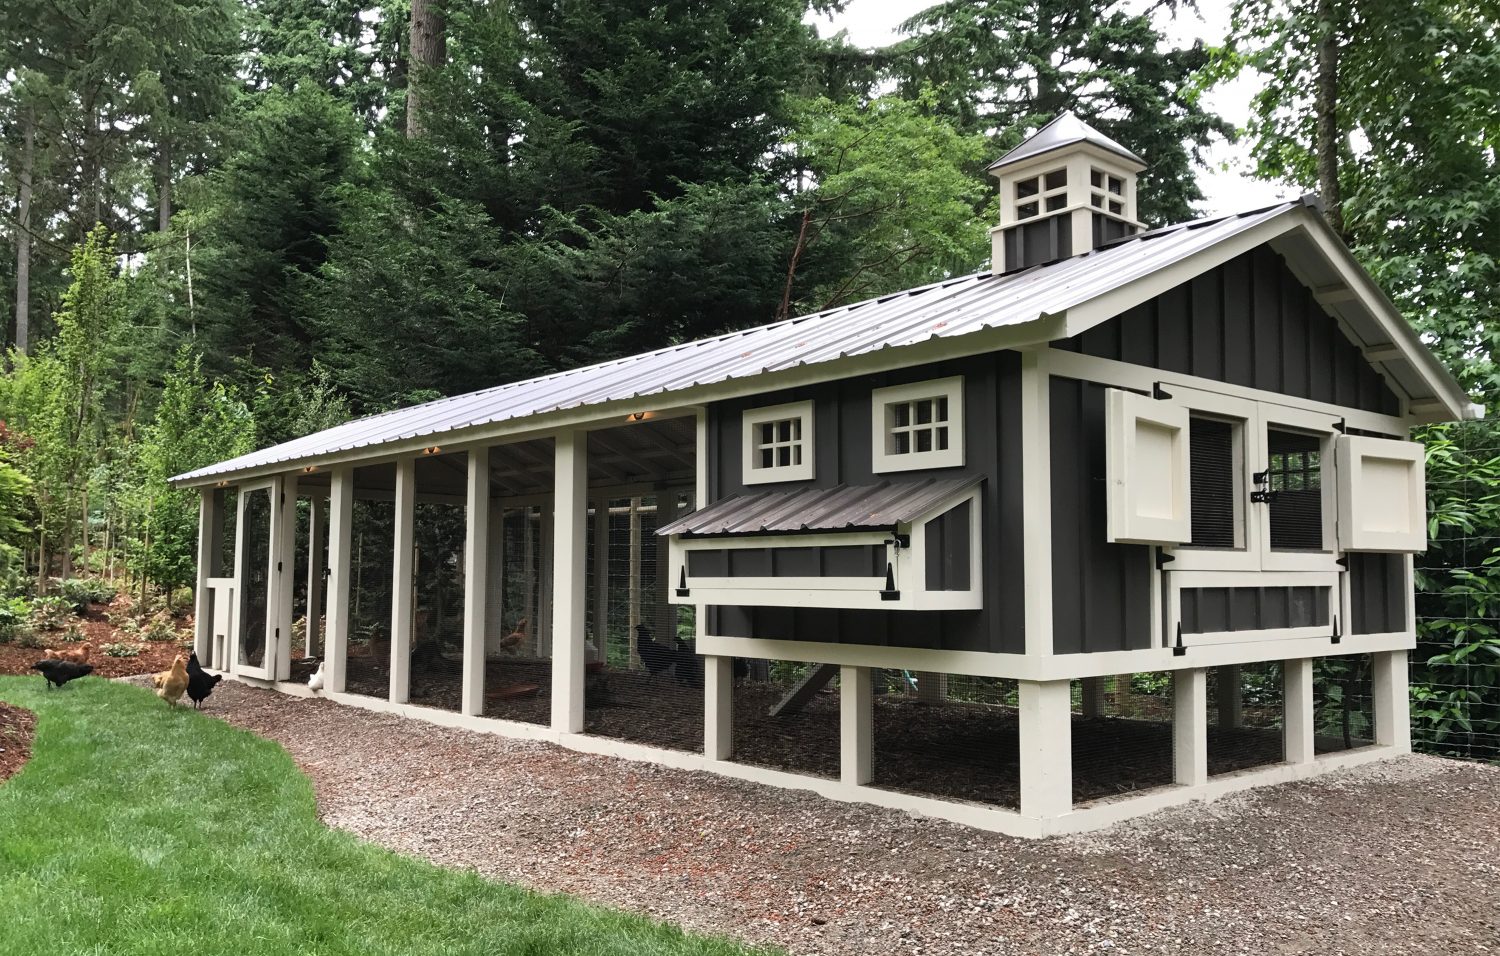 10′ x 30′ Carolina Coop with board and batten siding in Seattle, WA